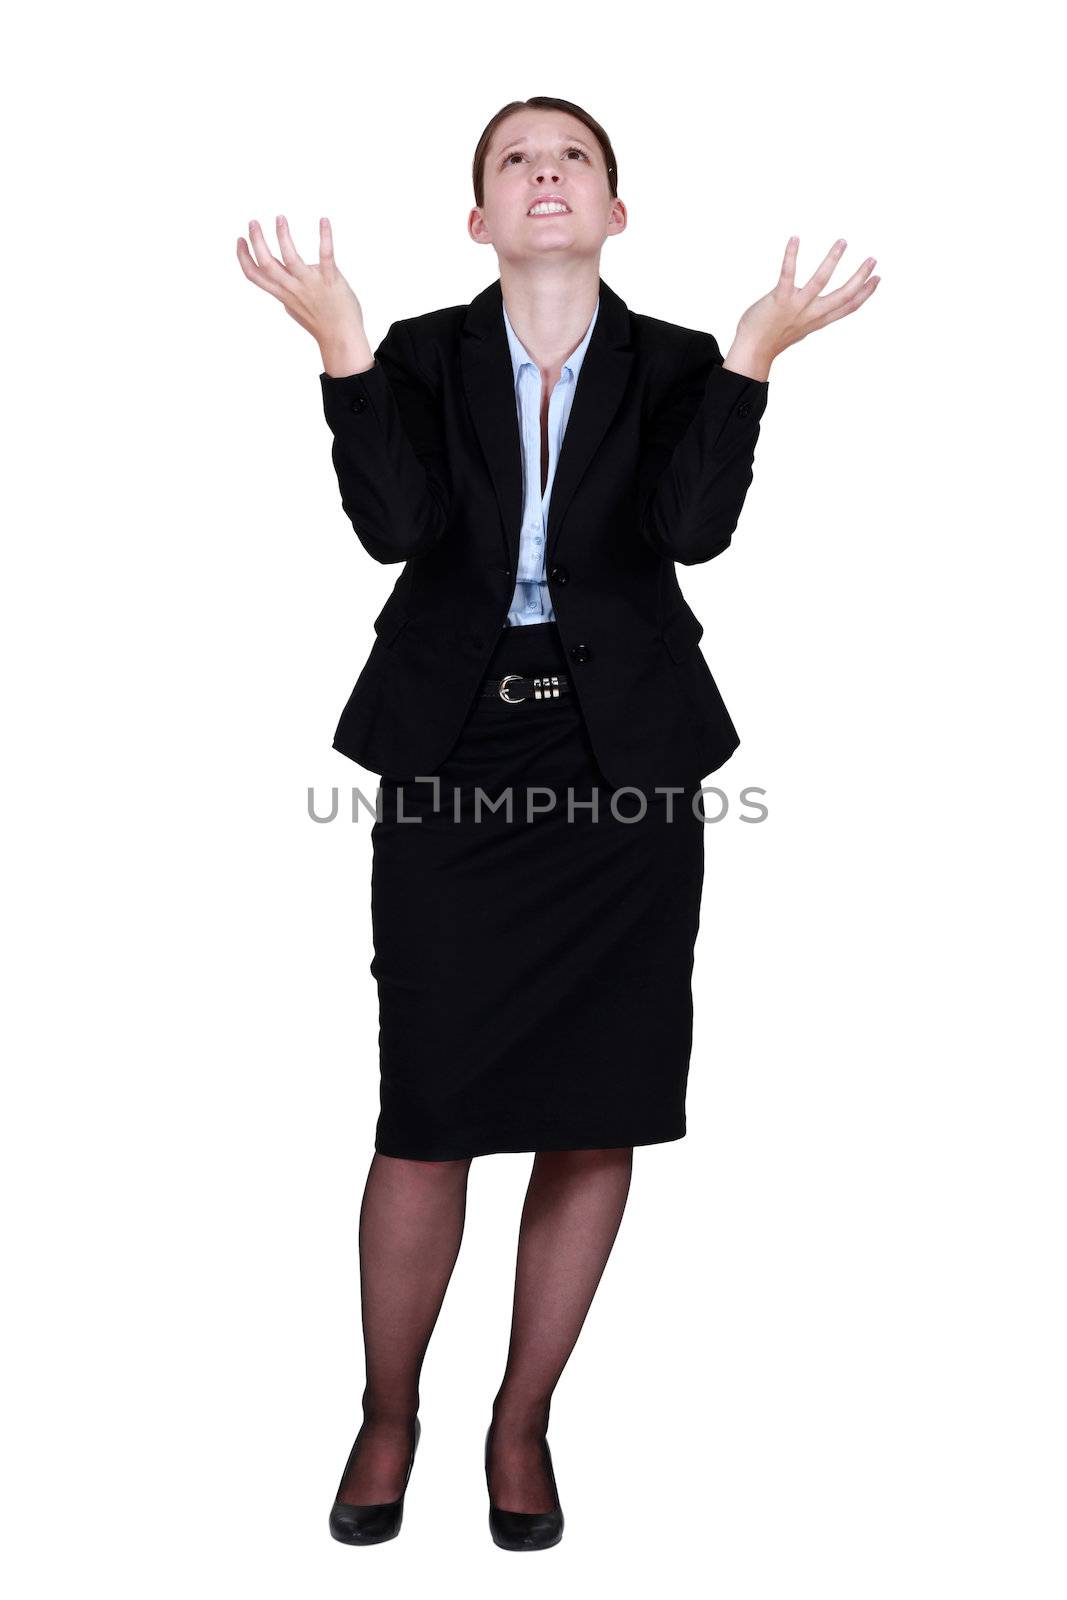 Annoyed businesswoman by phovoir